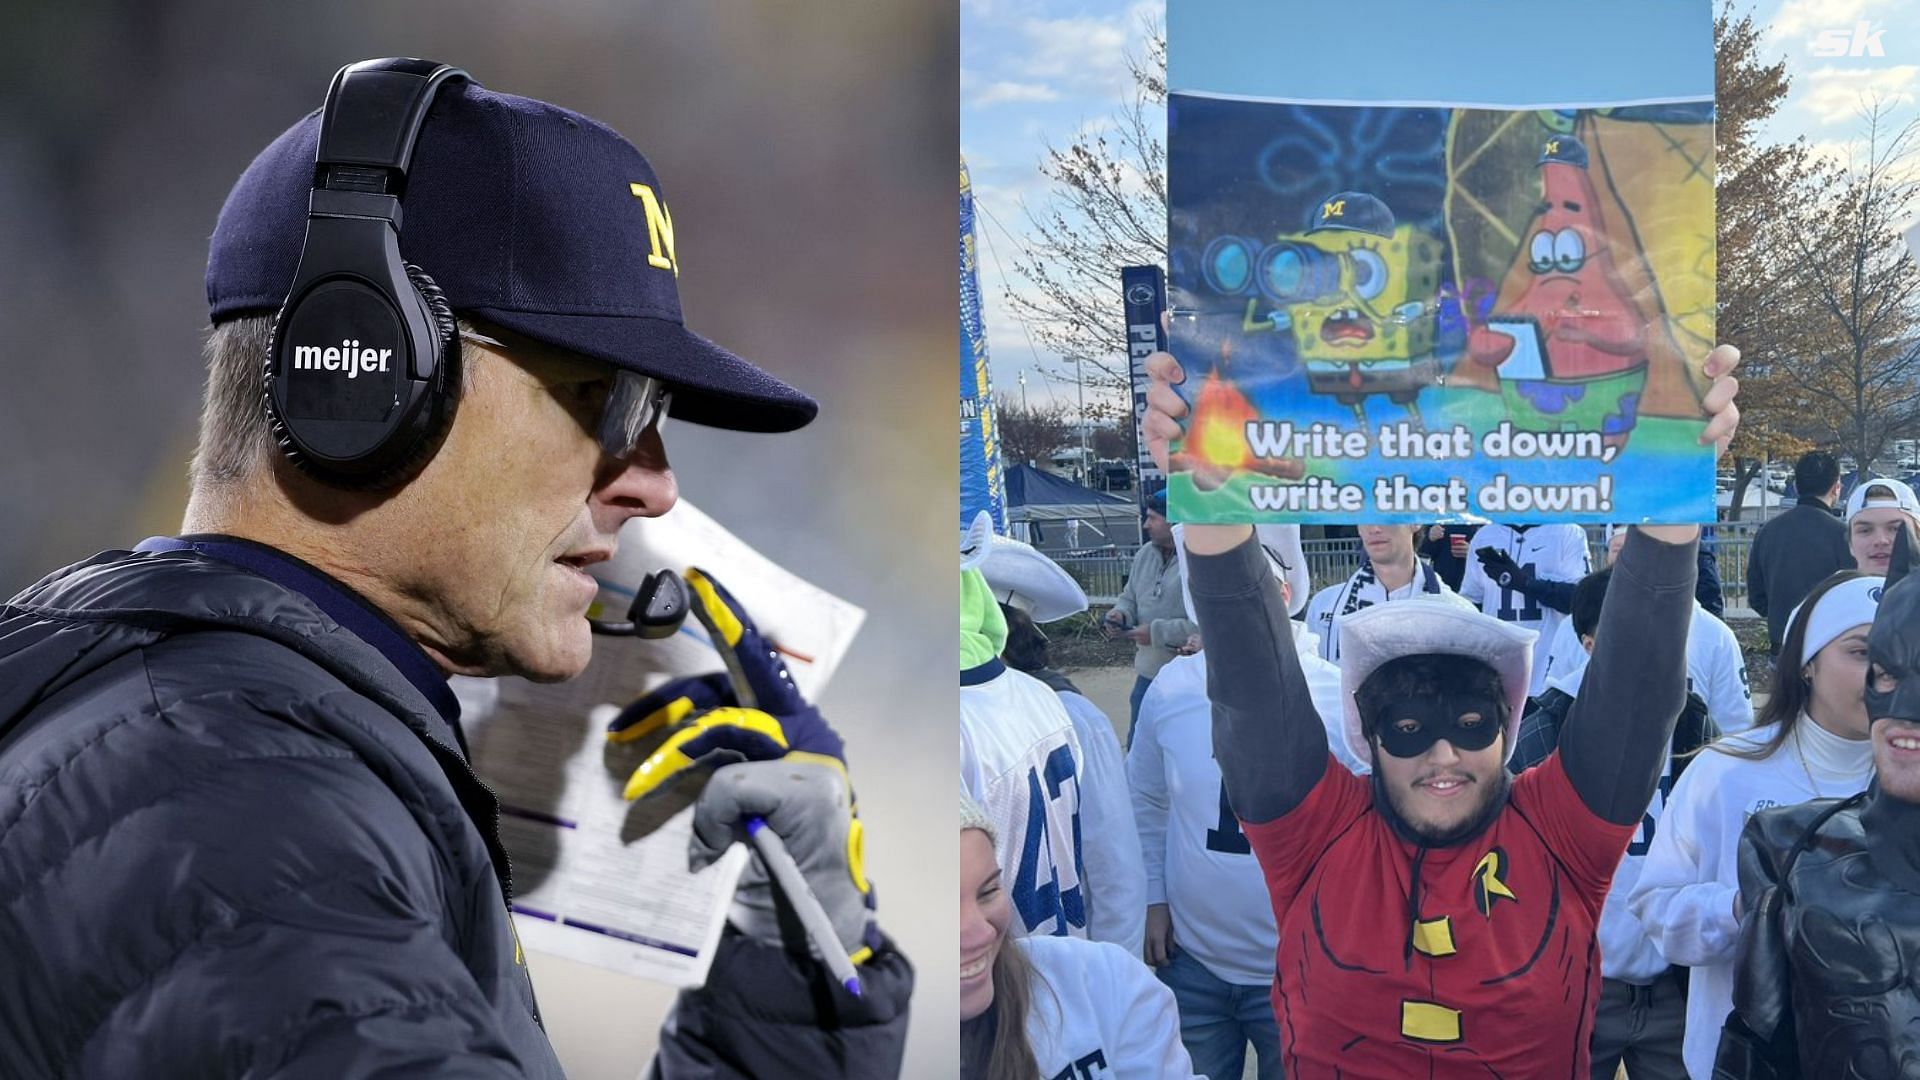 6 hysterical Jim Harbaugh memes after Big Ten suspension that are cracking up the internet